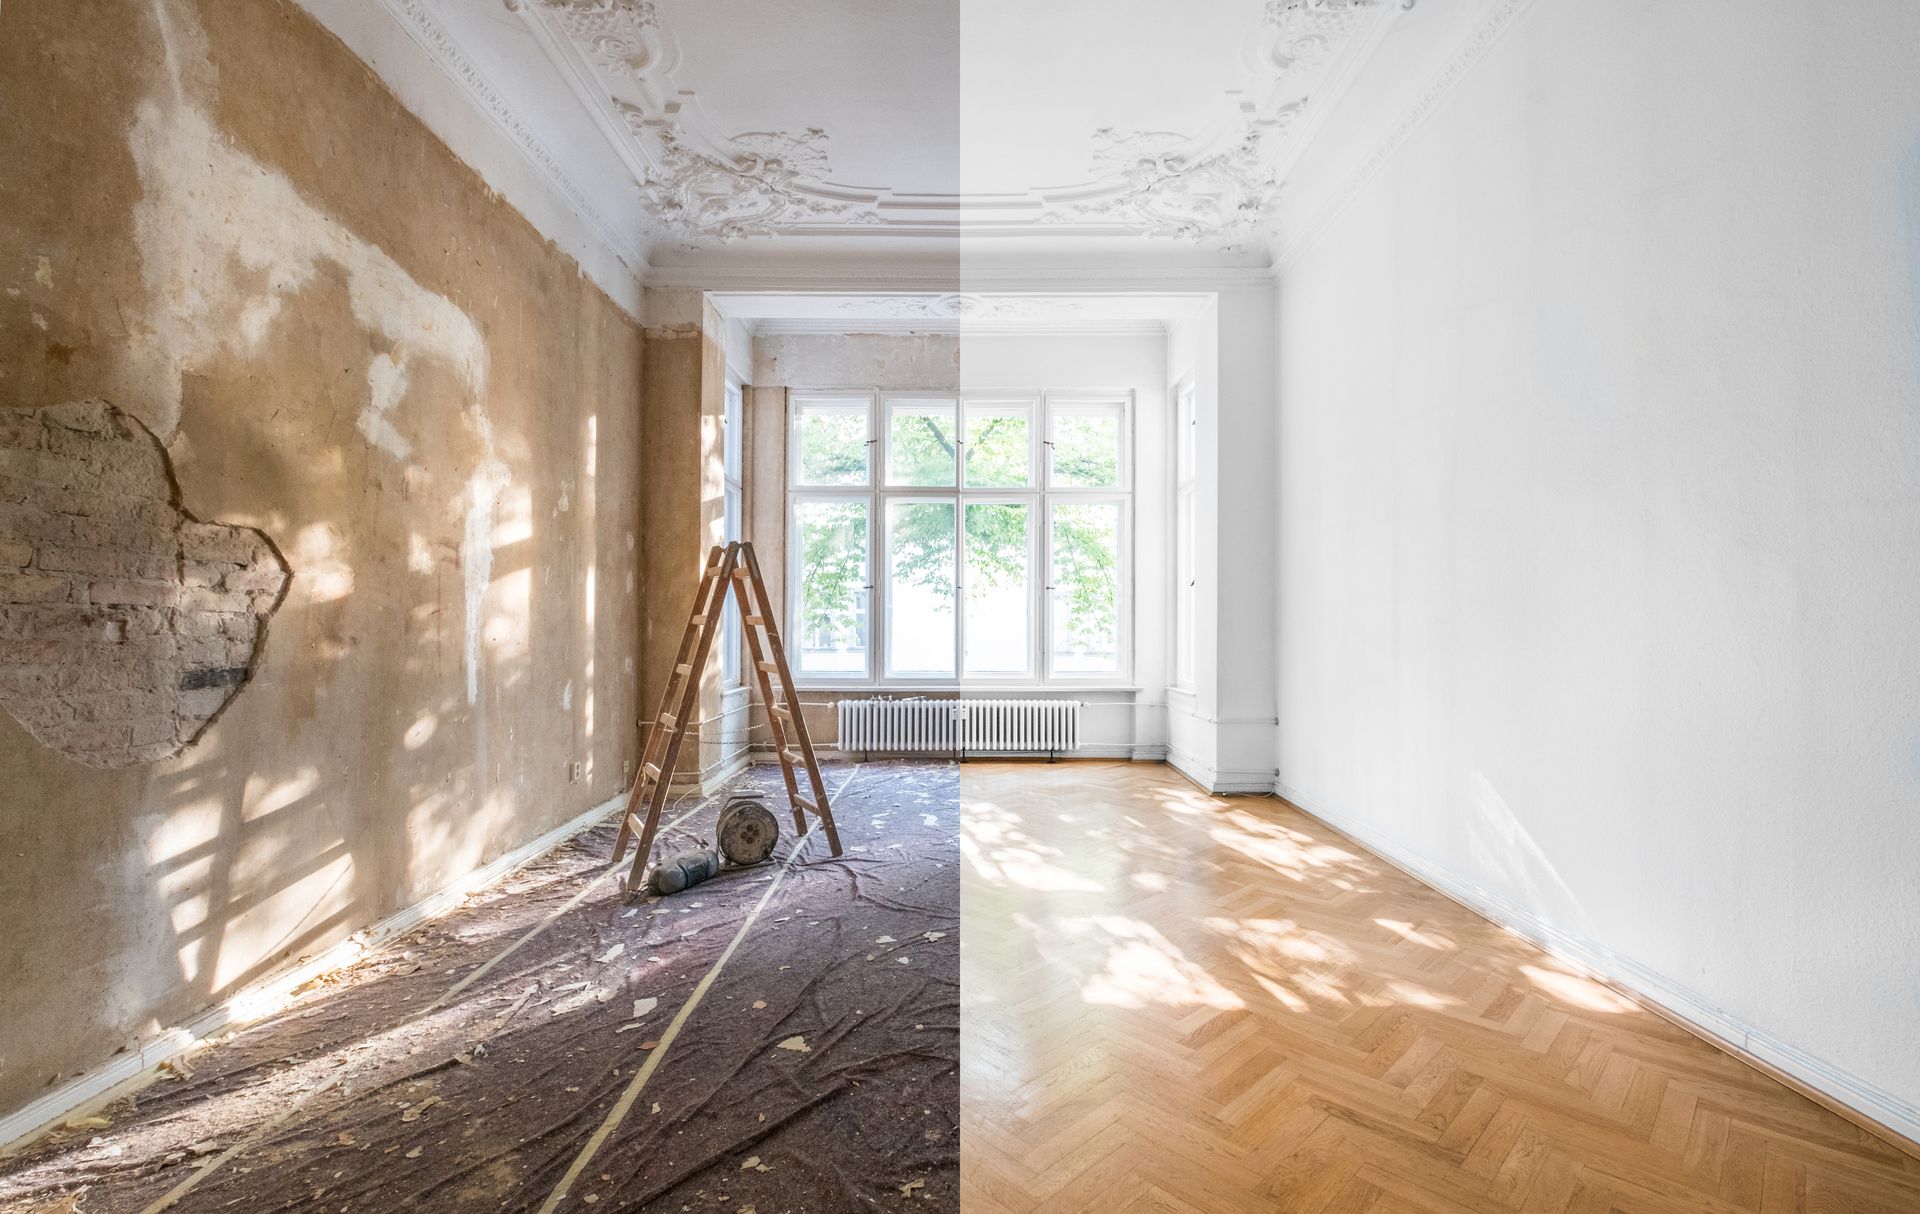 Before and after wall repair and painting: The 'before' image shows a damaged wall with visible cracks and peeling paint. The 'after' image displays a beautifully restored wall with smooth surfaces, fresh paint, and no visible signs of damage.